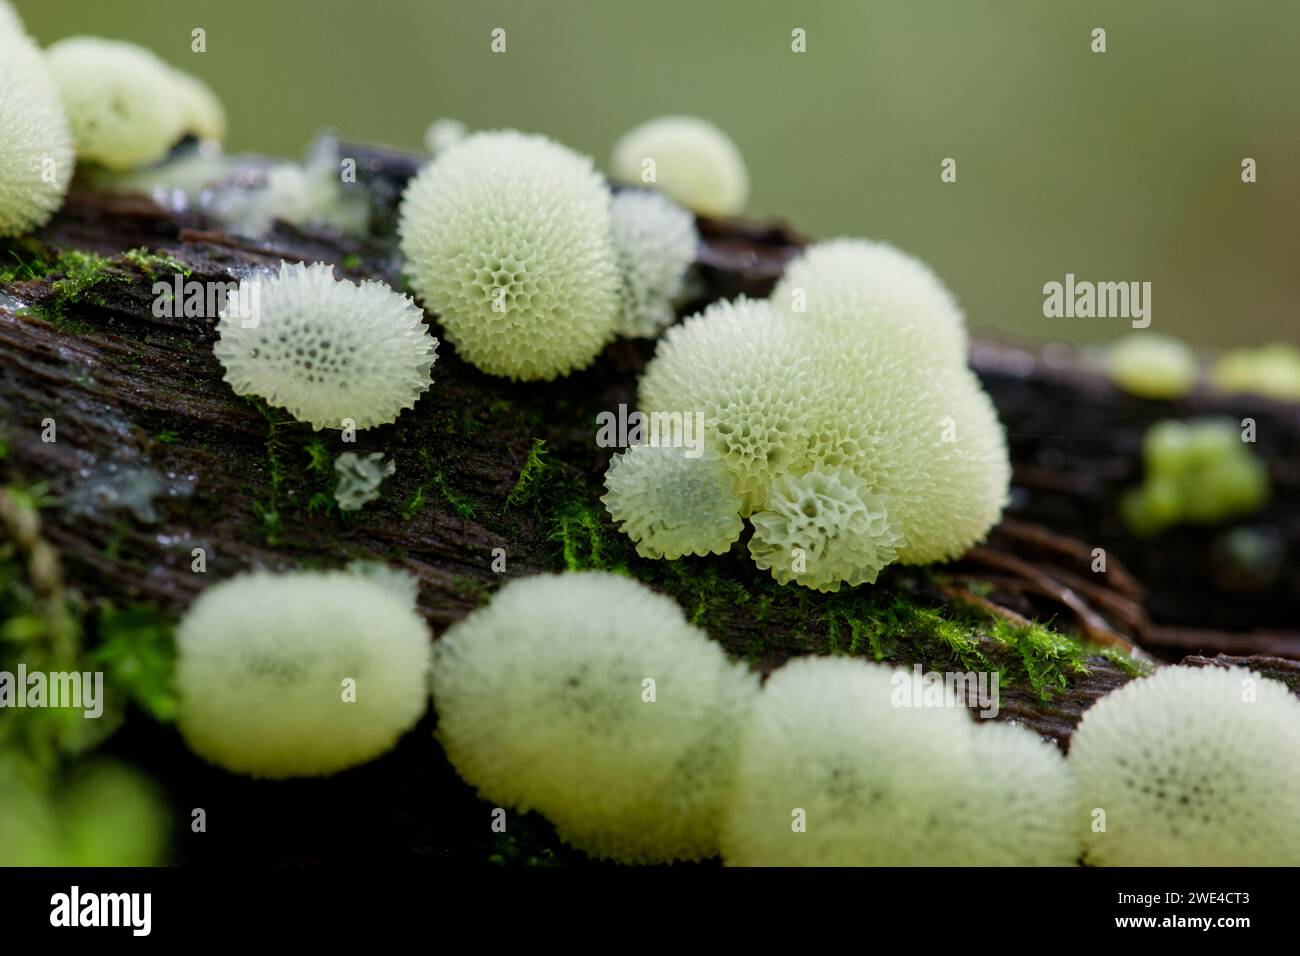 Moisissure corallienne (Ceratiomyxa fruticulosa porioides) Banque D'Images